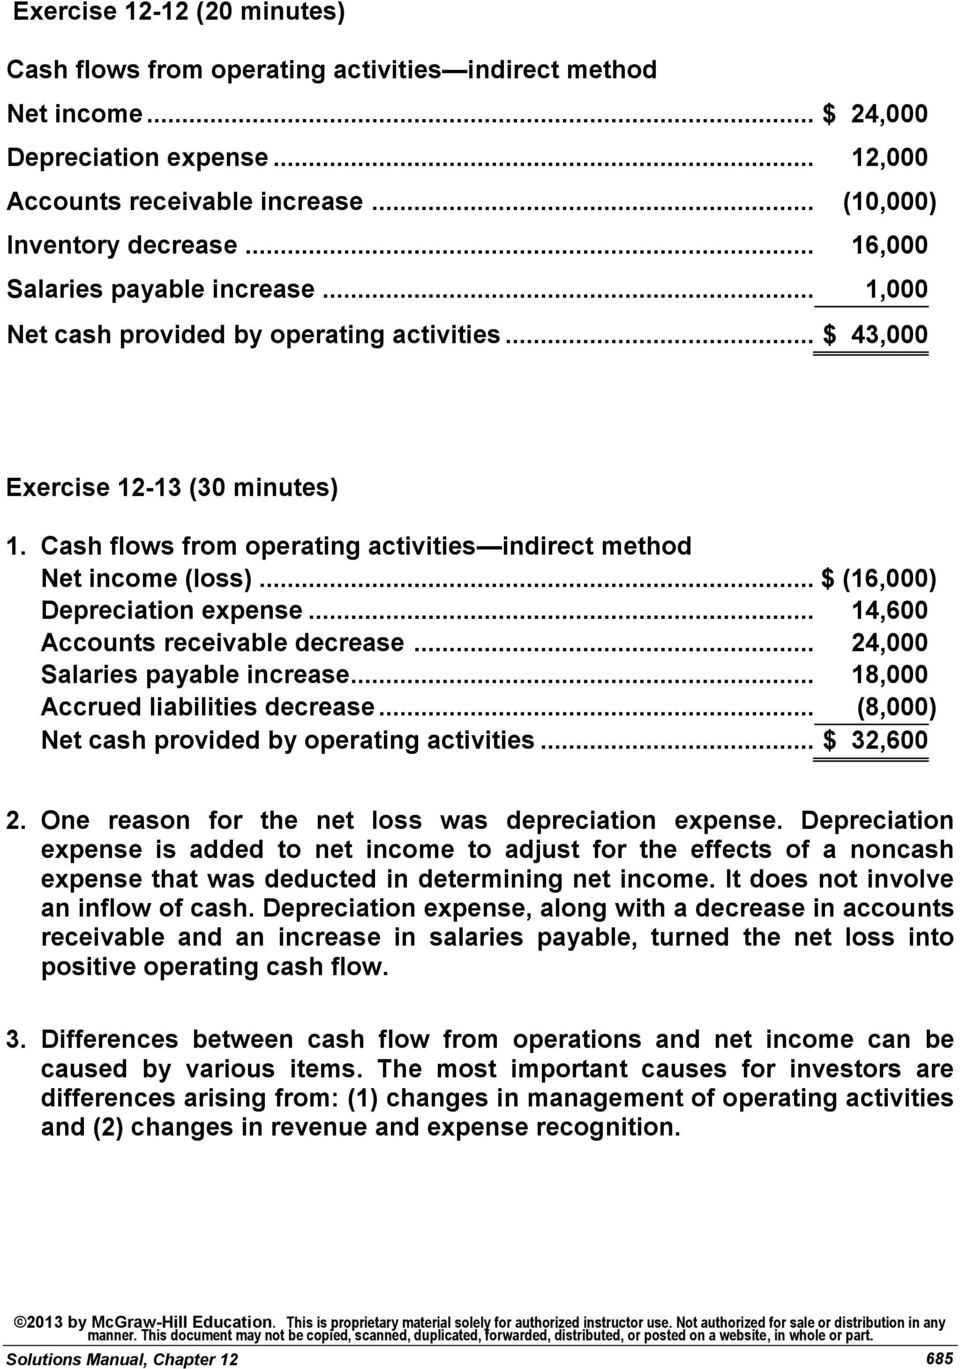 .. 24,000 Salaries payable increase... 18,000 Accrued liabilities decrease... (8,000) Net cash provided by operating activities... $ 32,600 2. One reason for the net loss was depreciation expense.